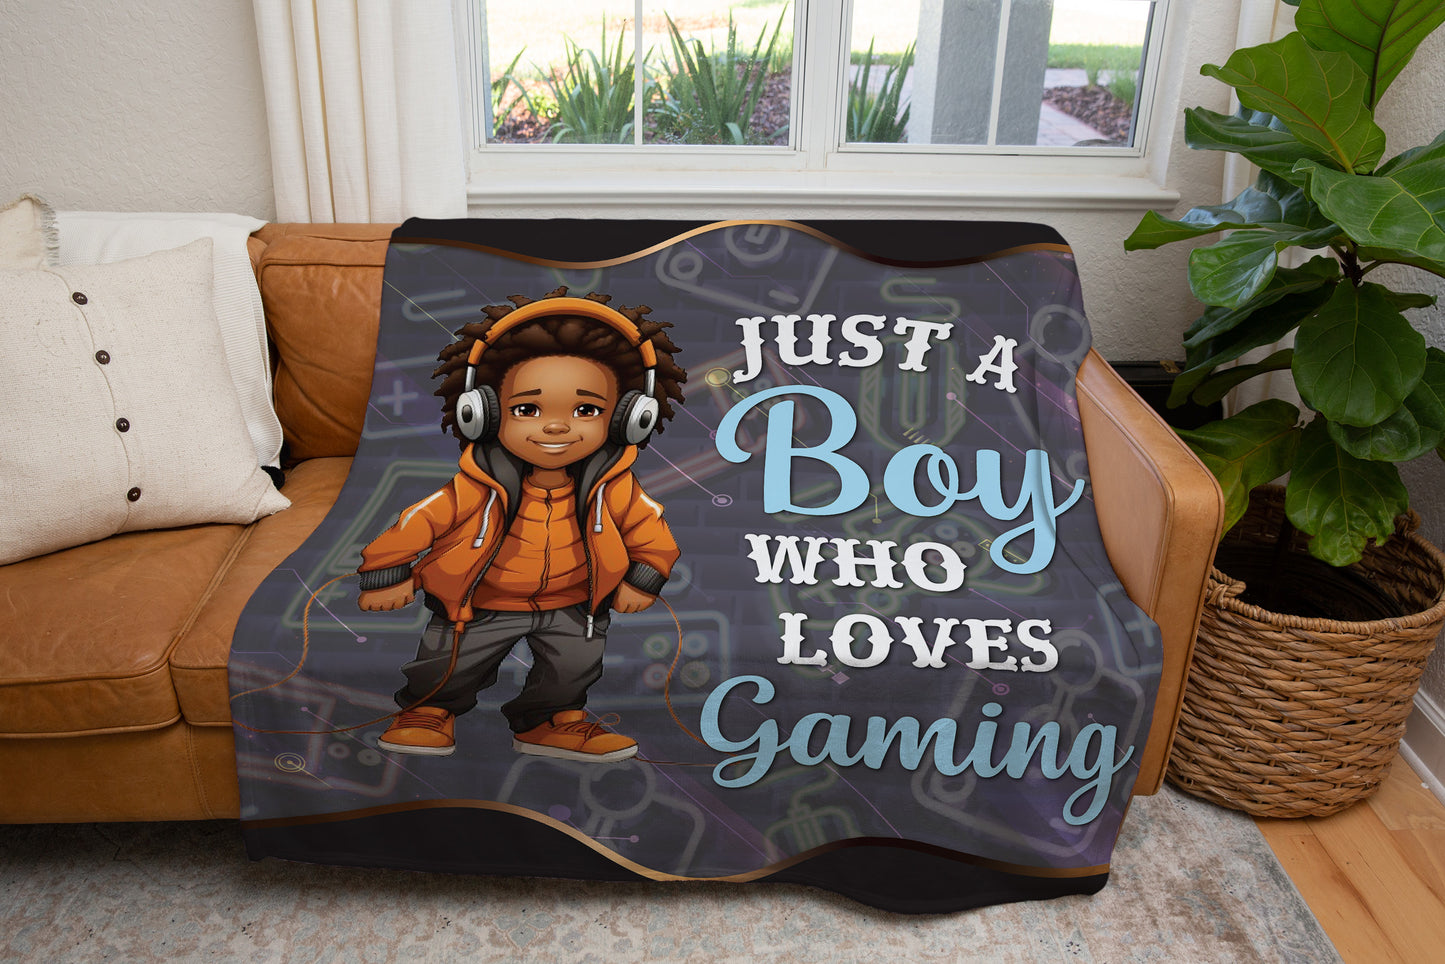 Just A Boy Who Loves Gaming | Arctic Fleece Blanket 50x60